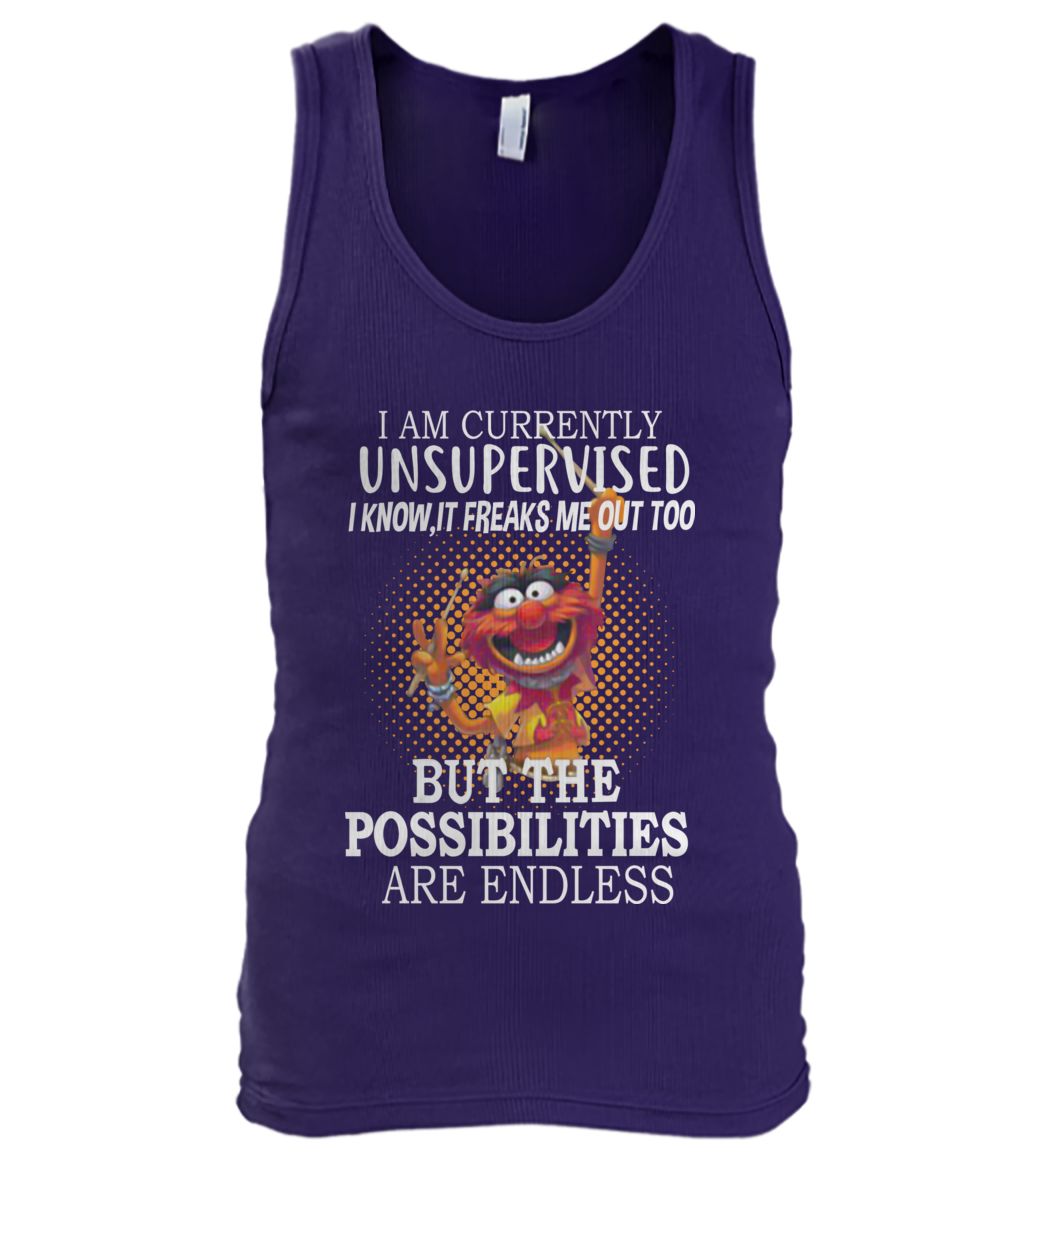 Muppet I am currently unsupervised I know it freaks me out too men's tank top